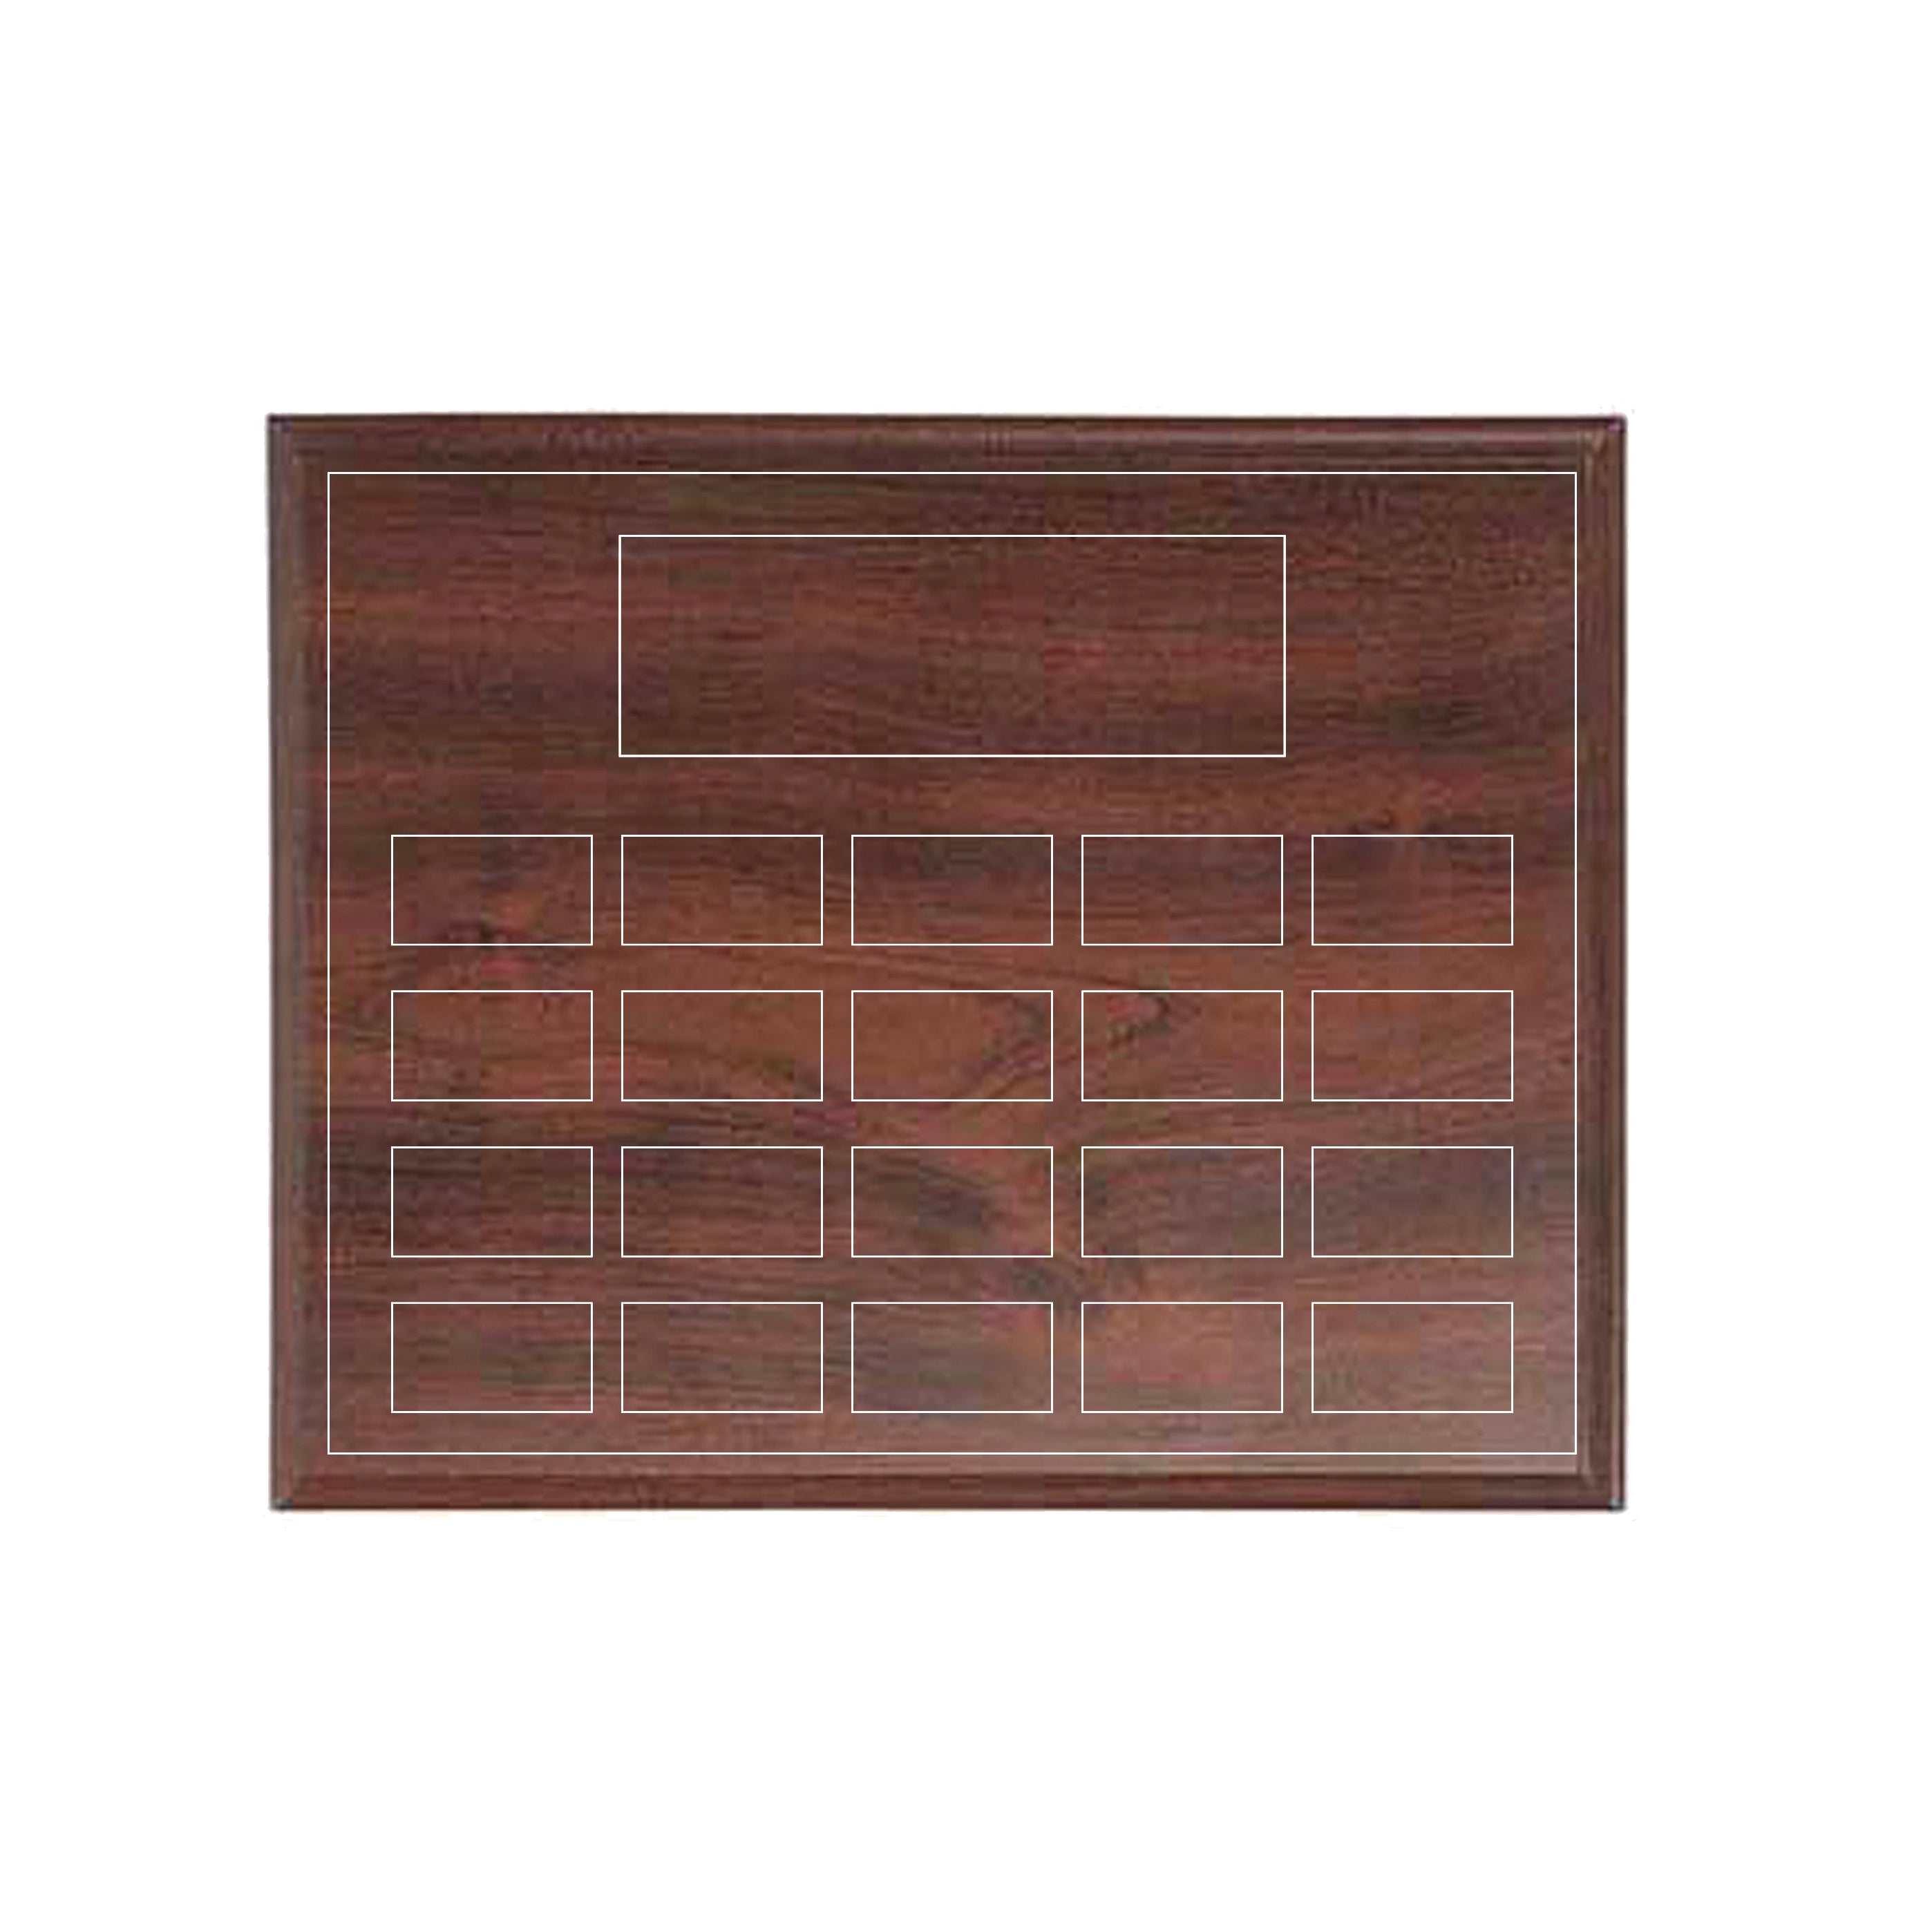 20 Plate Annual Award Plaque - 12" X 15" Cherrywood Laminate - Nothers